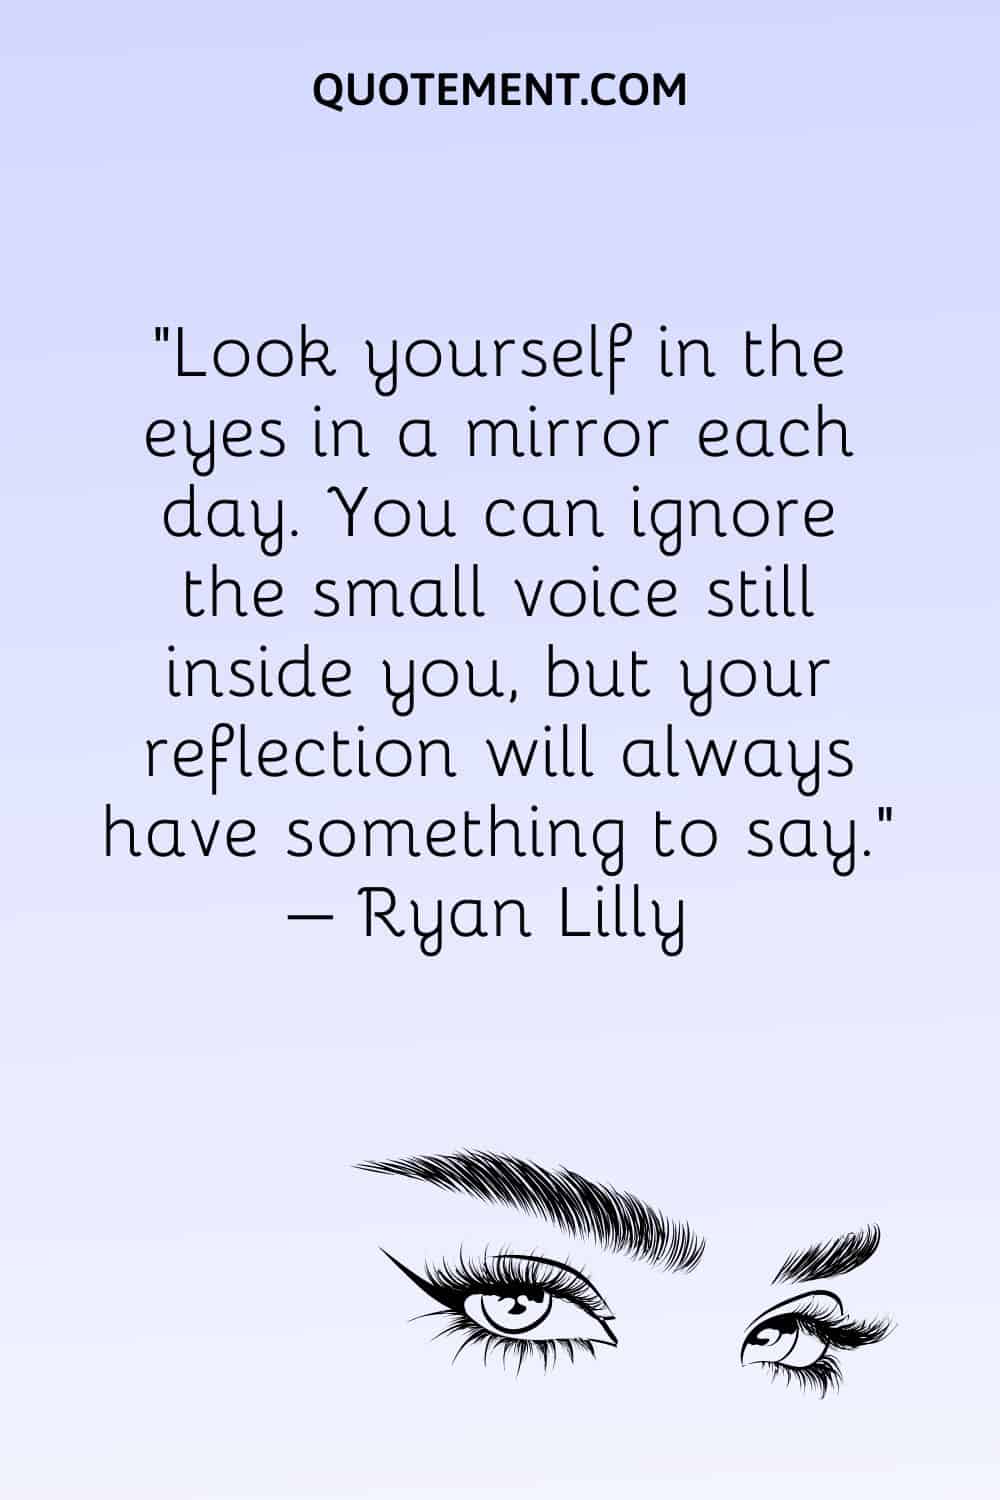 Look yourself in the eyes in a mirror each day. You can ignore the small voice still inside you, but your reflection will always have something to say